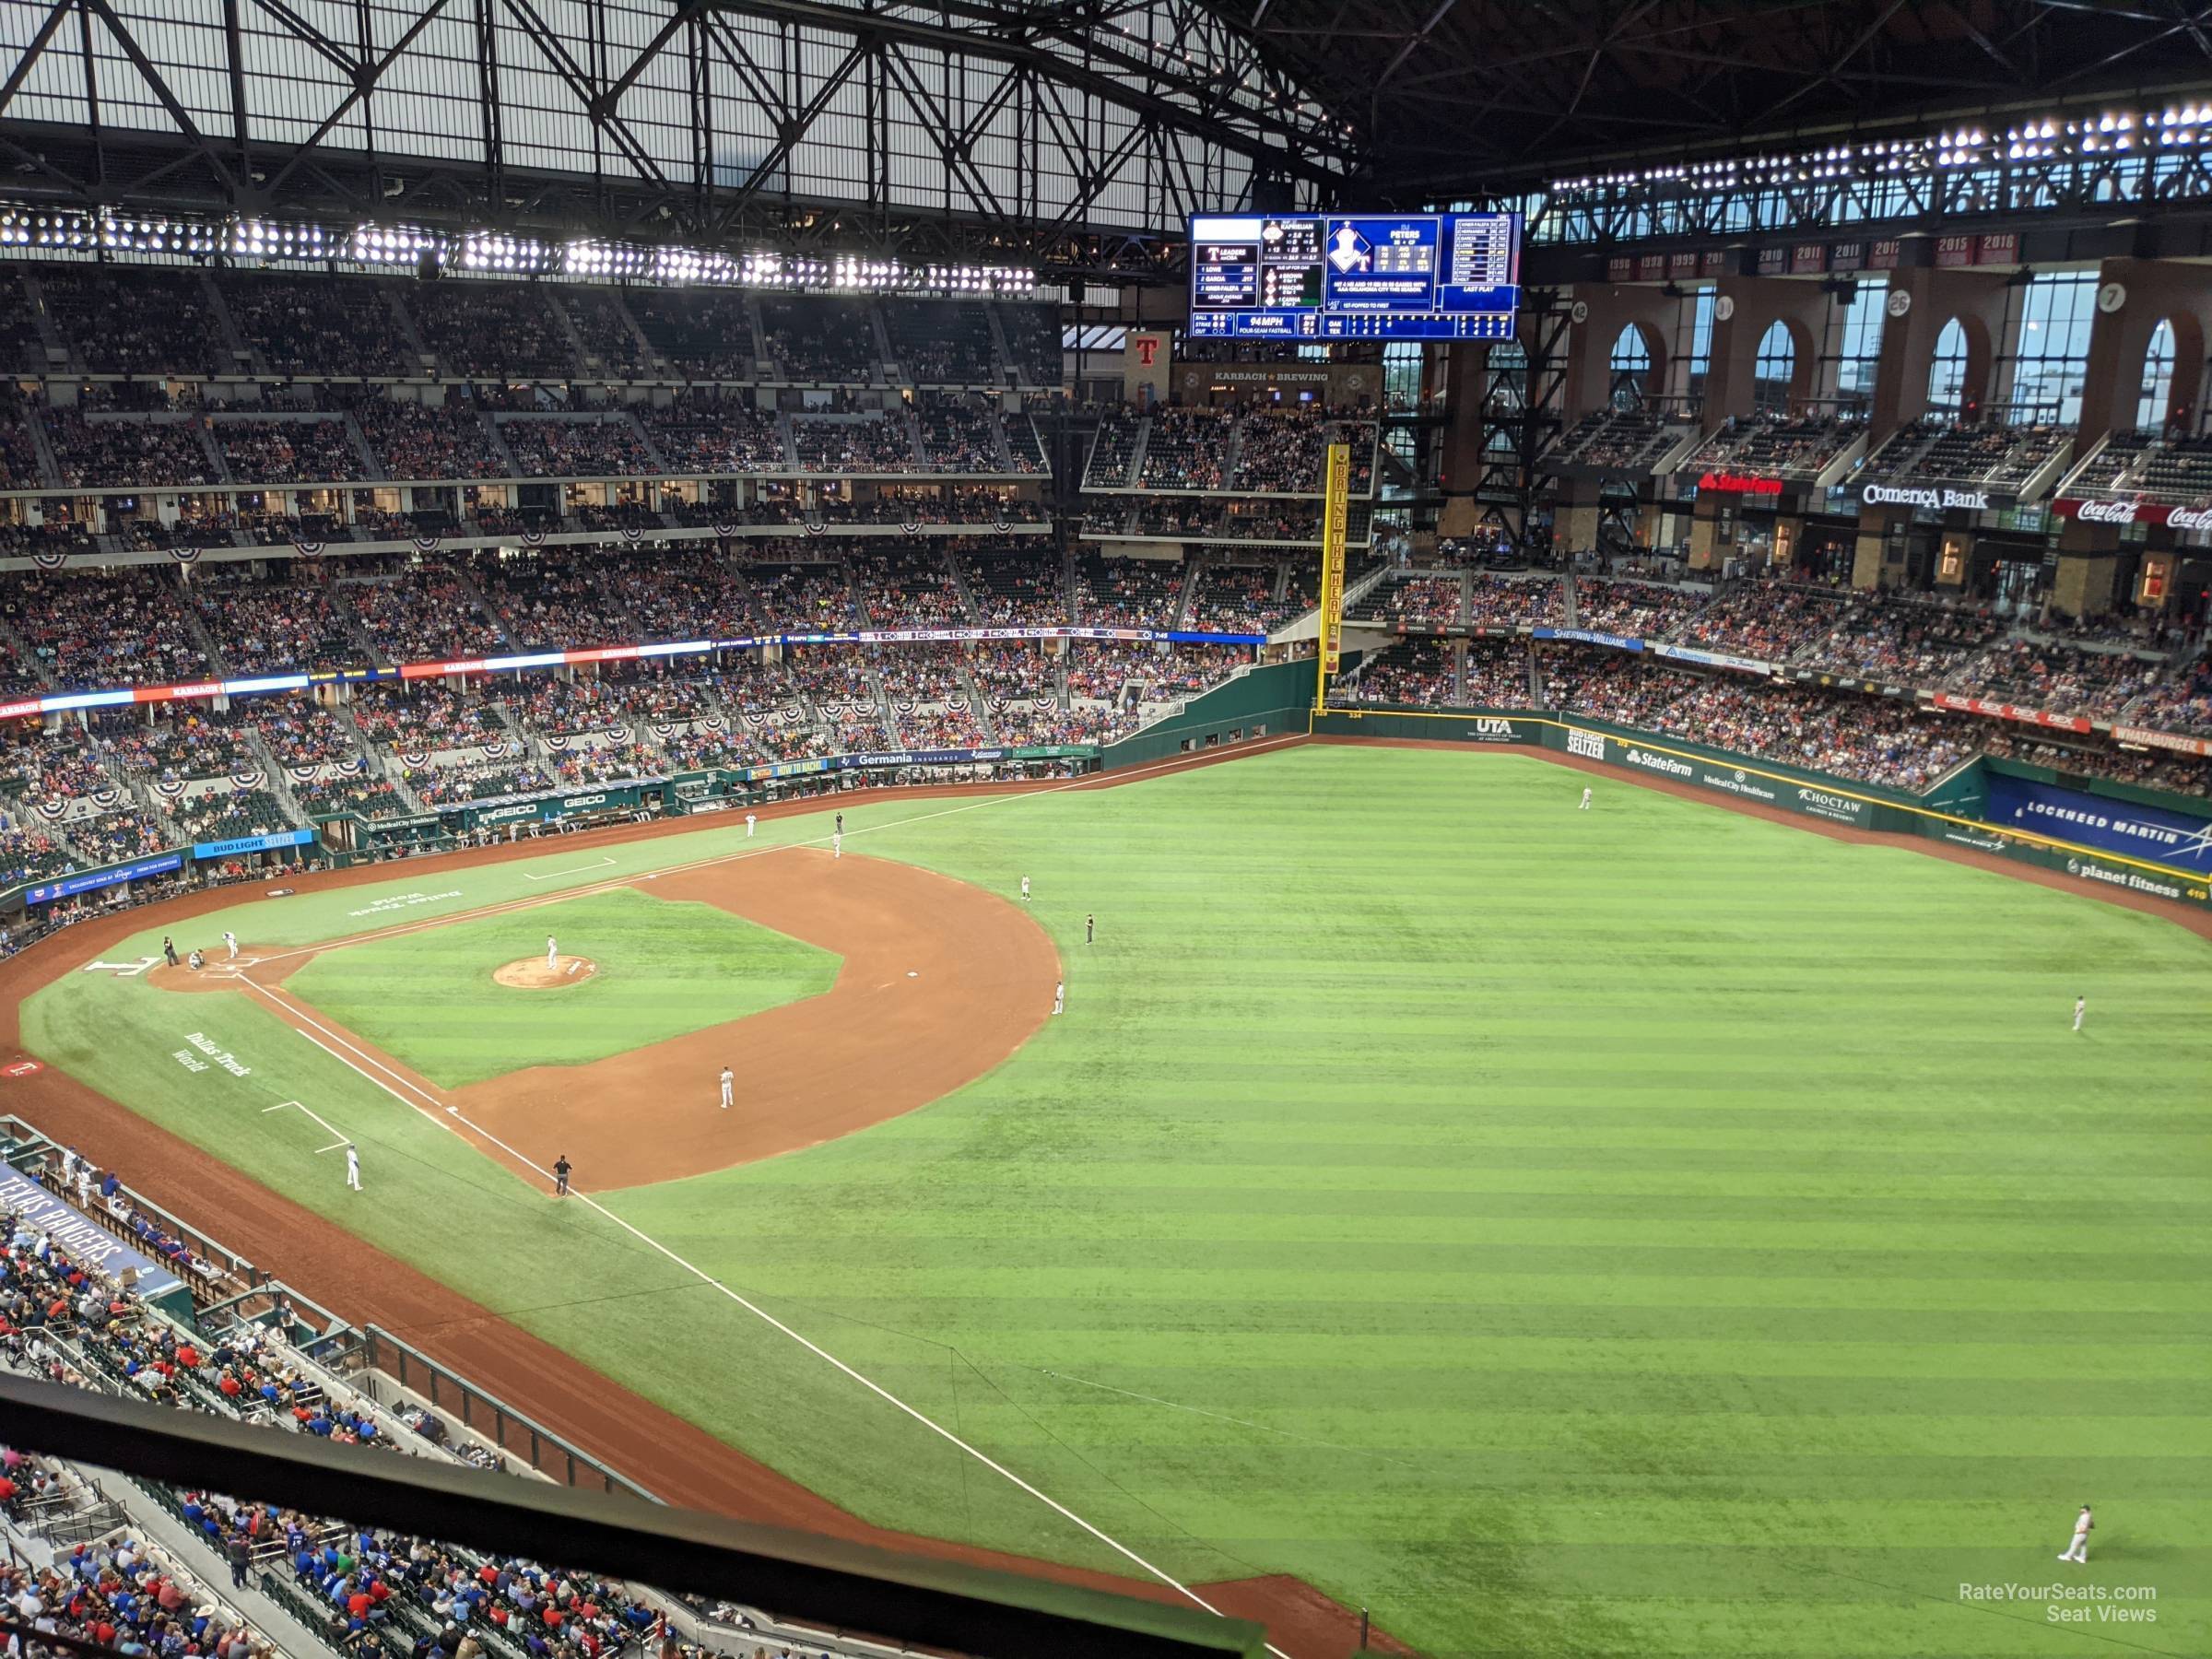 Section 323 at Globe Life Field 